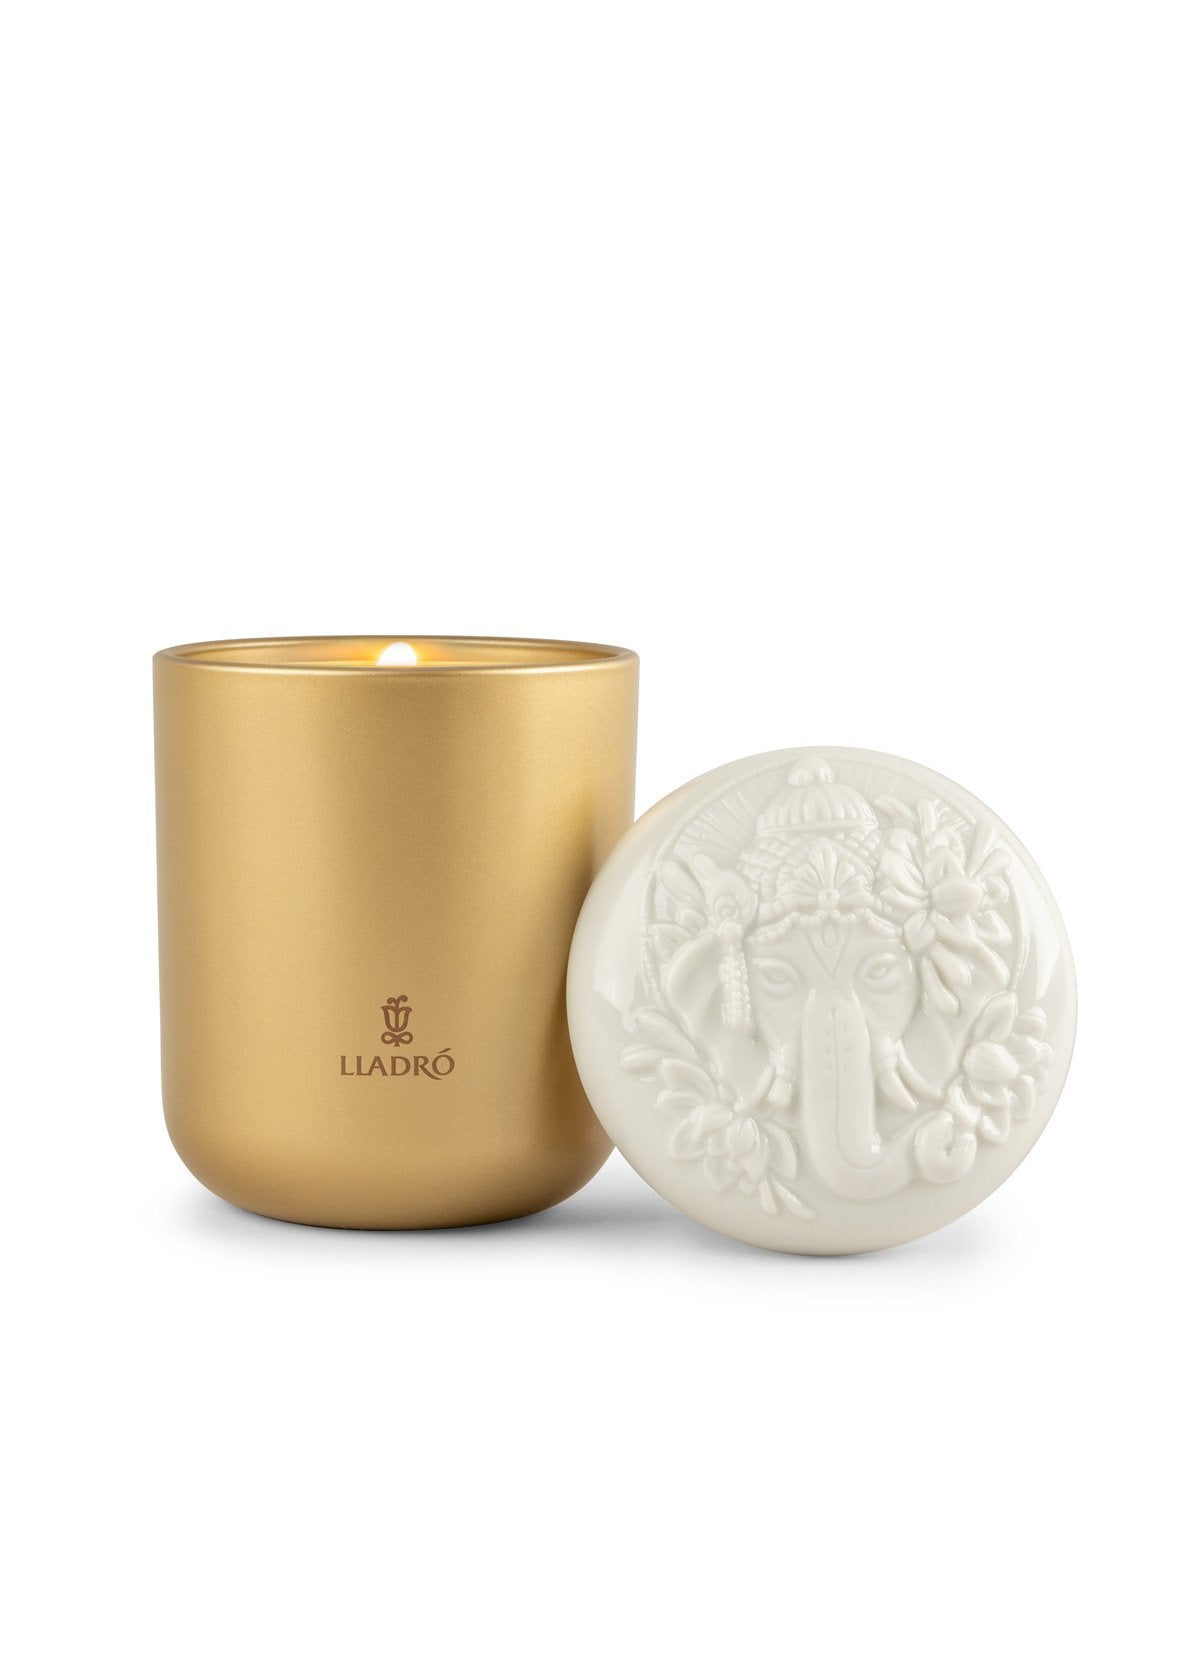 Lord Ganesha Scented Candle - Gardens of Valencia - FormFluent